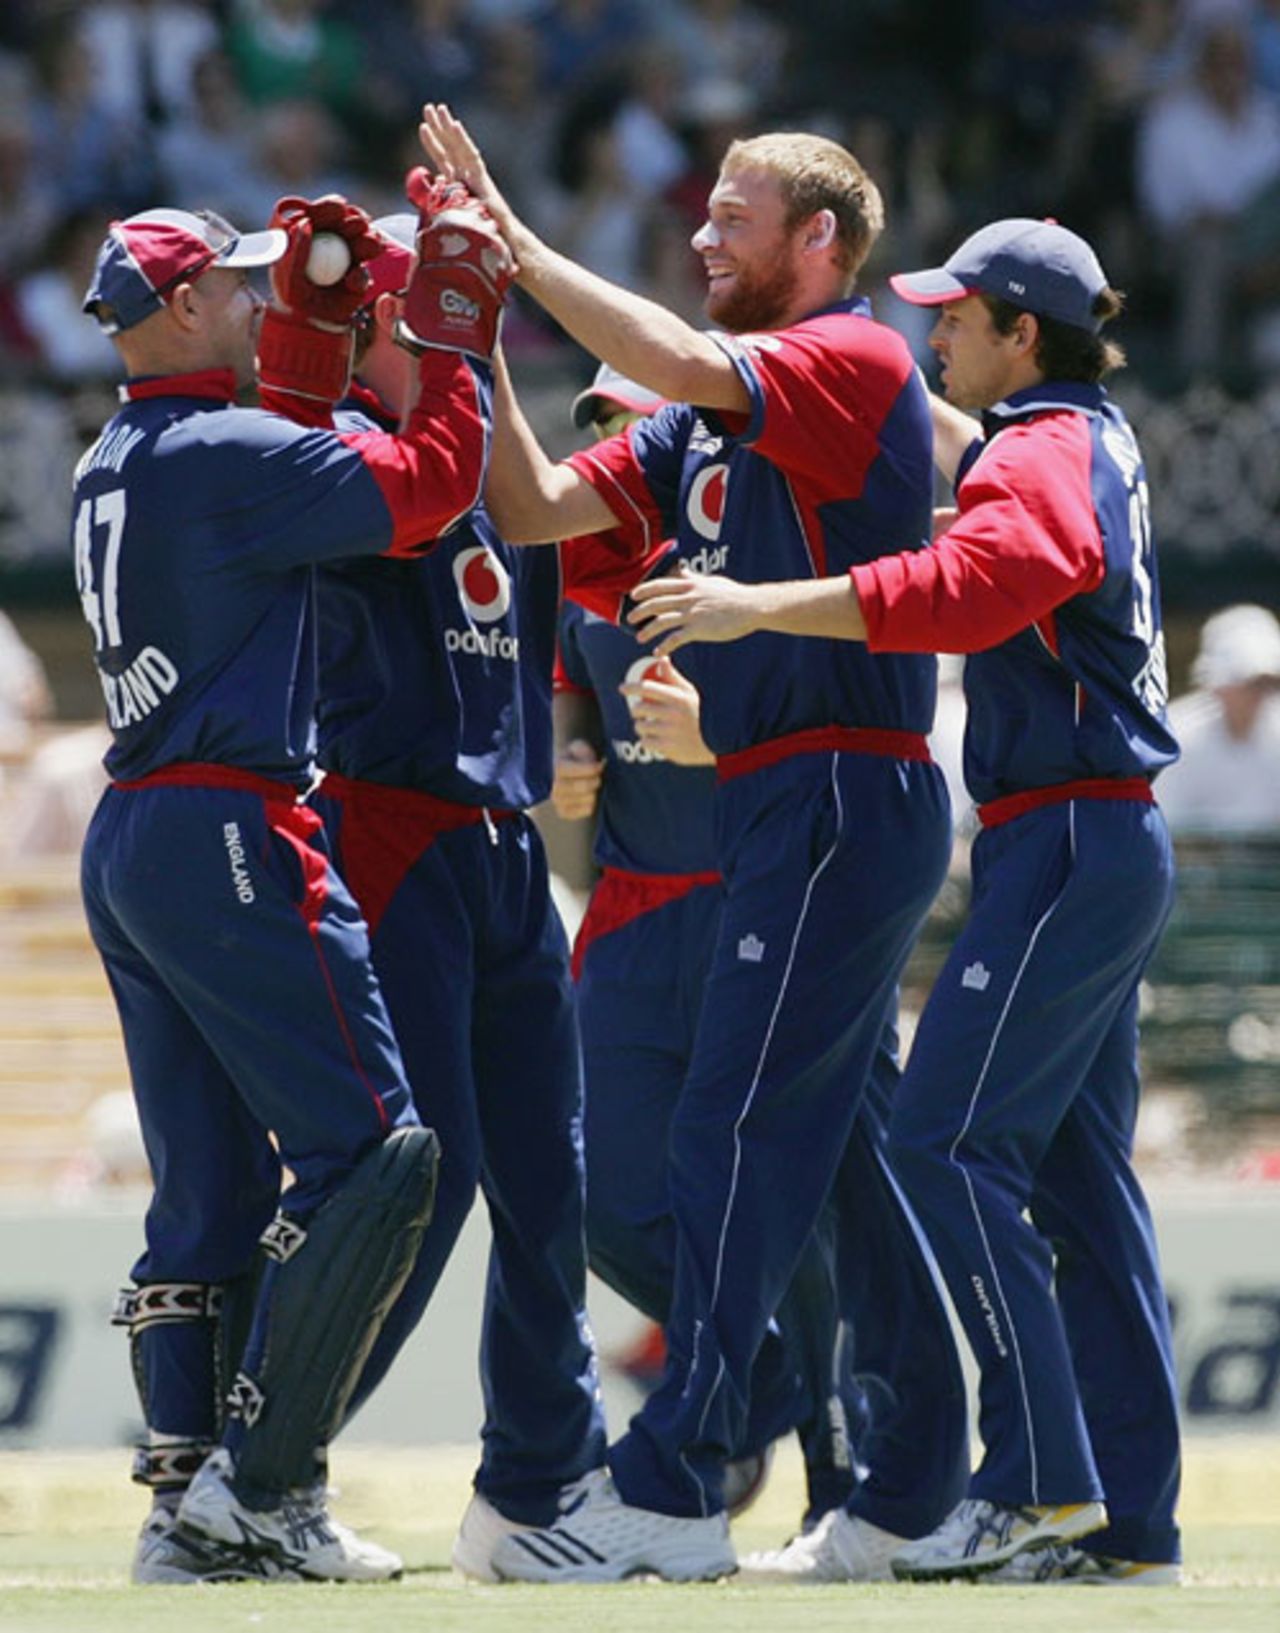 England players crowd round Andrew Flintoff after he removed Stephen Fleming, England v New Zealand, CB Series, Adelaide, January 23, 2007